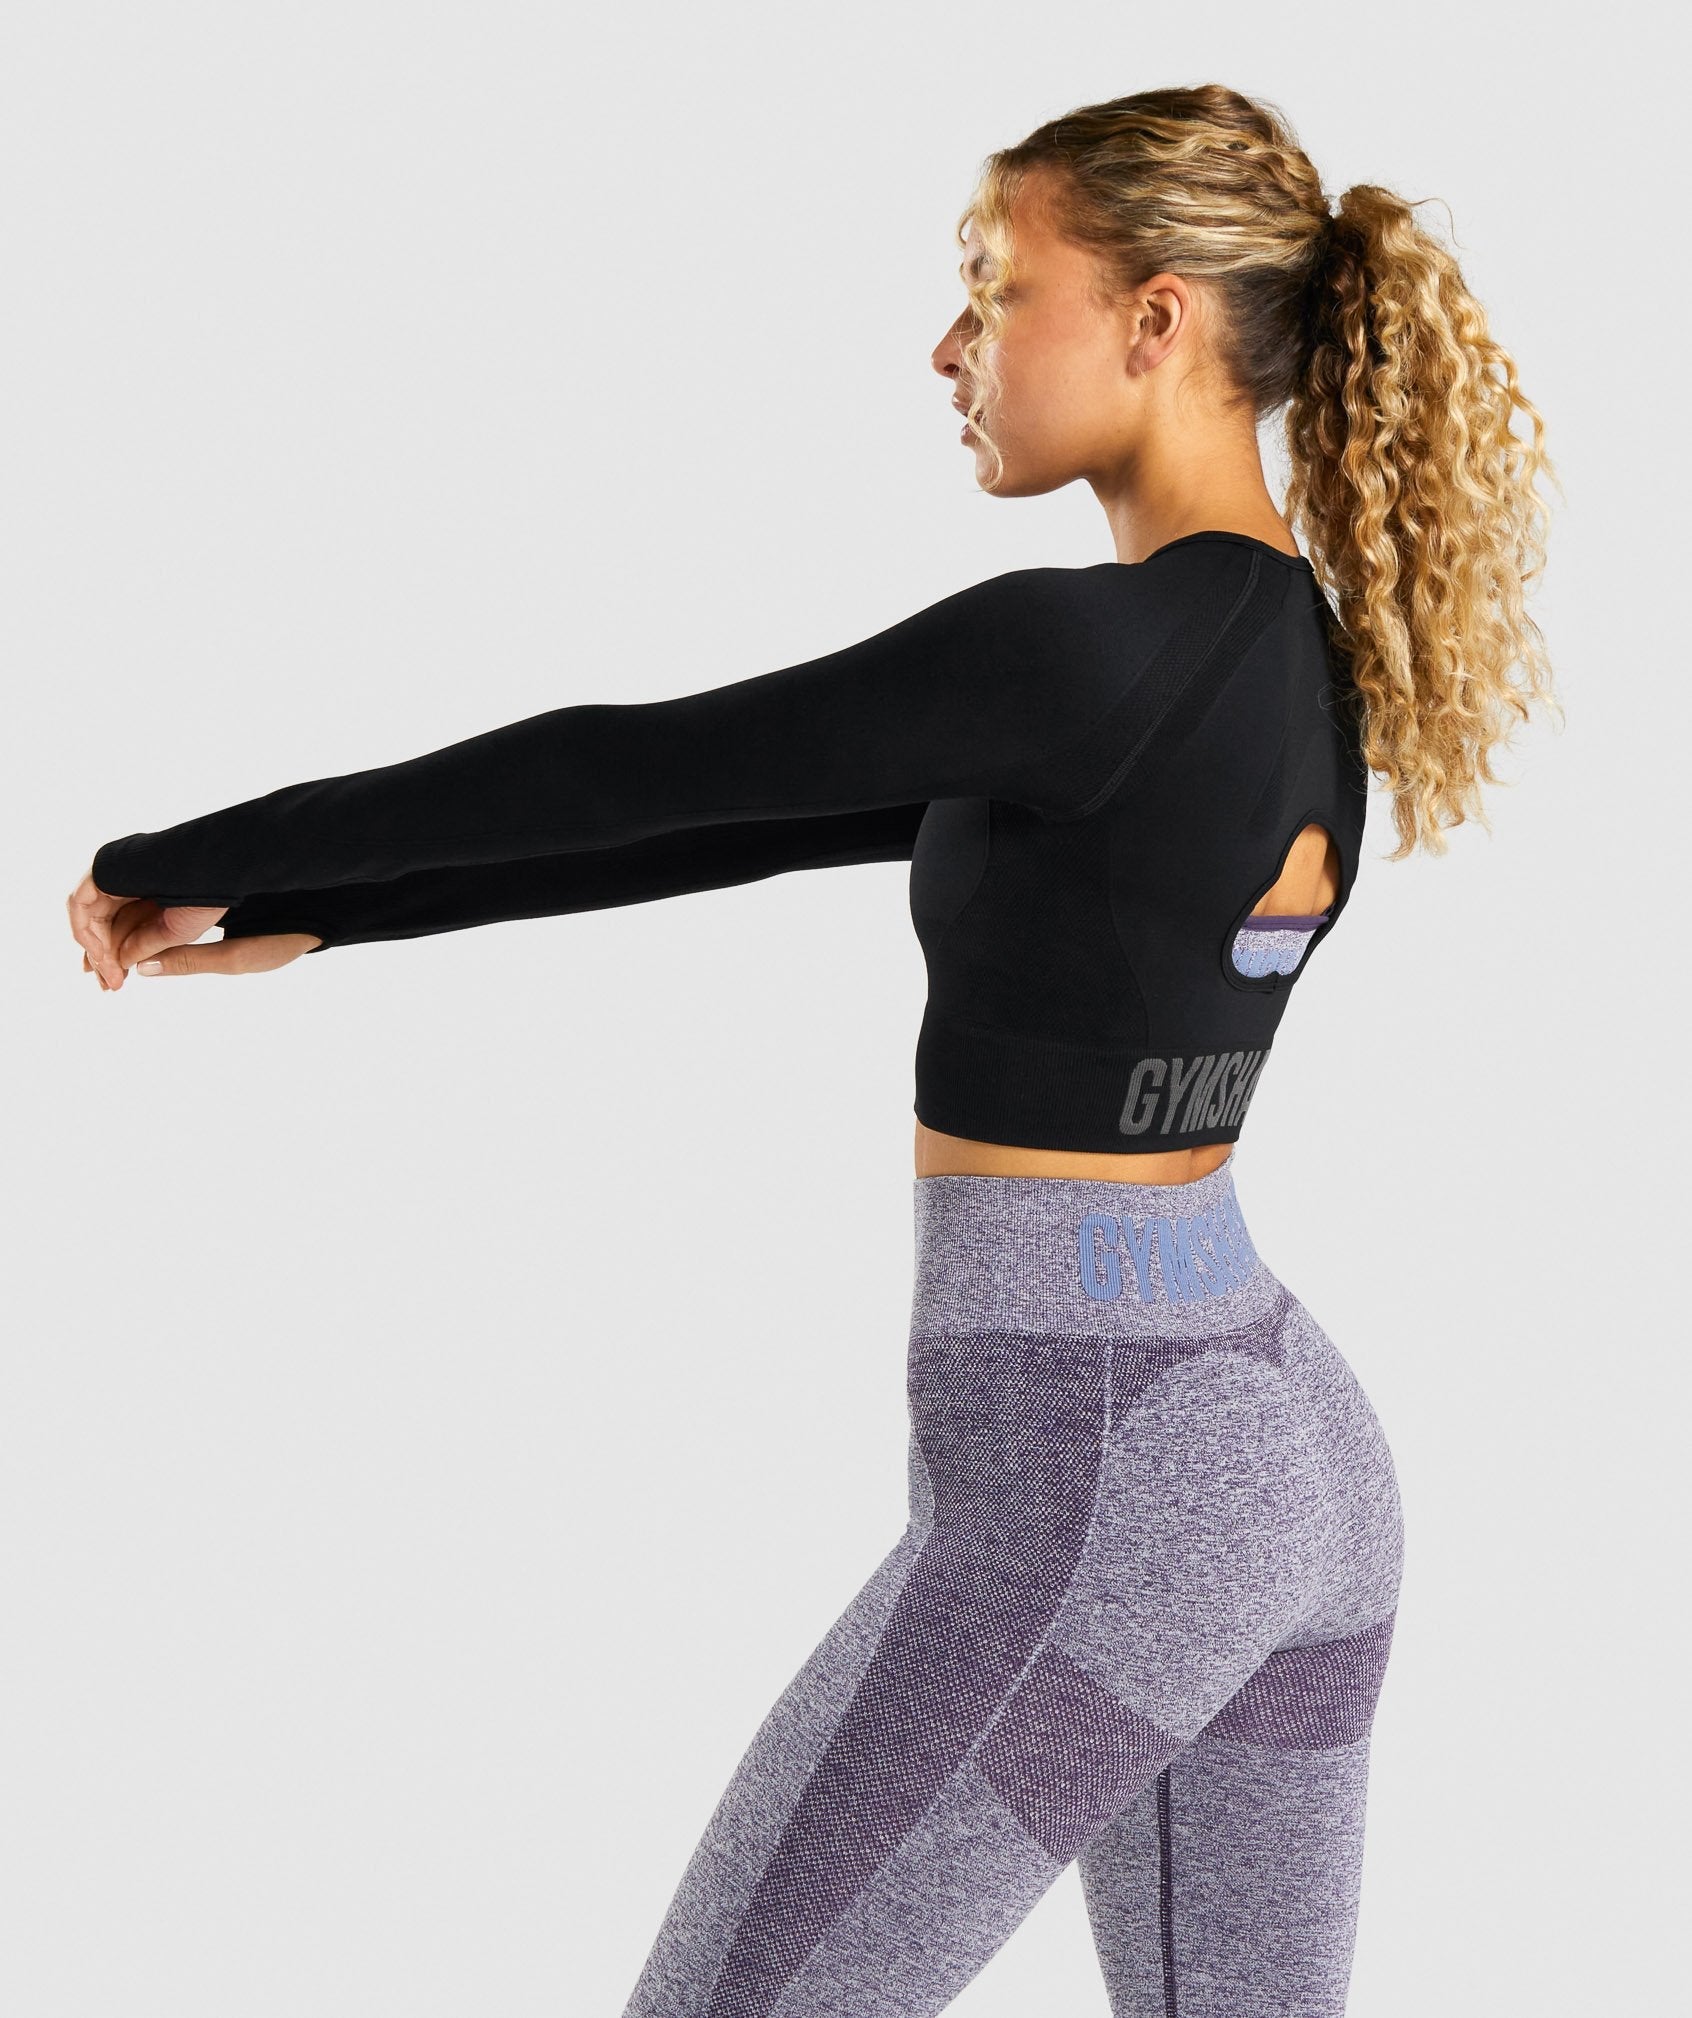 Flex Sports Long Sleeve Crop Top in Black/Charcoal - view 3